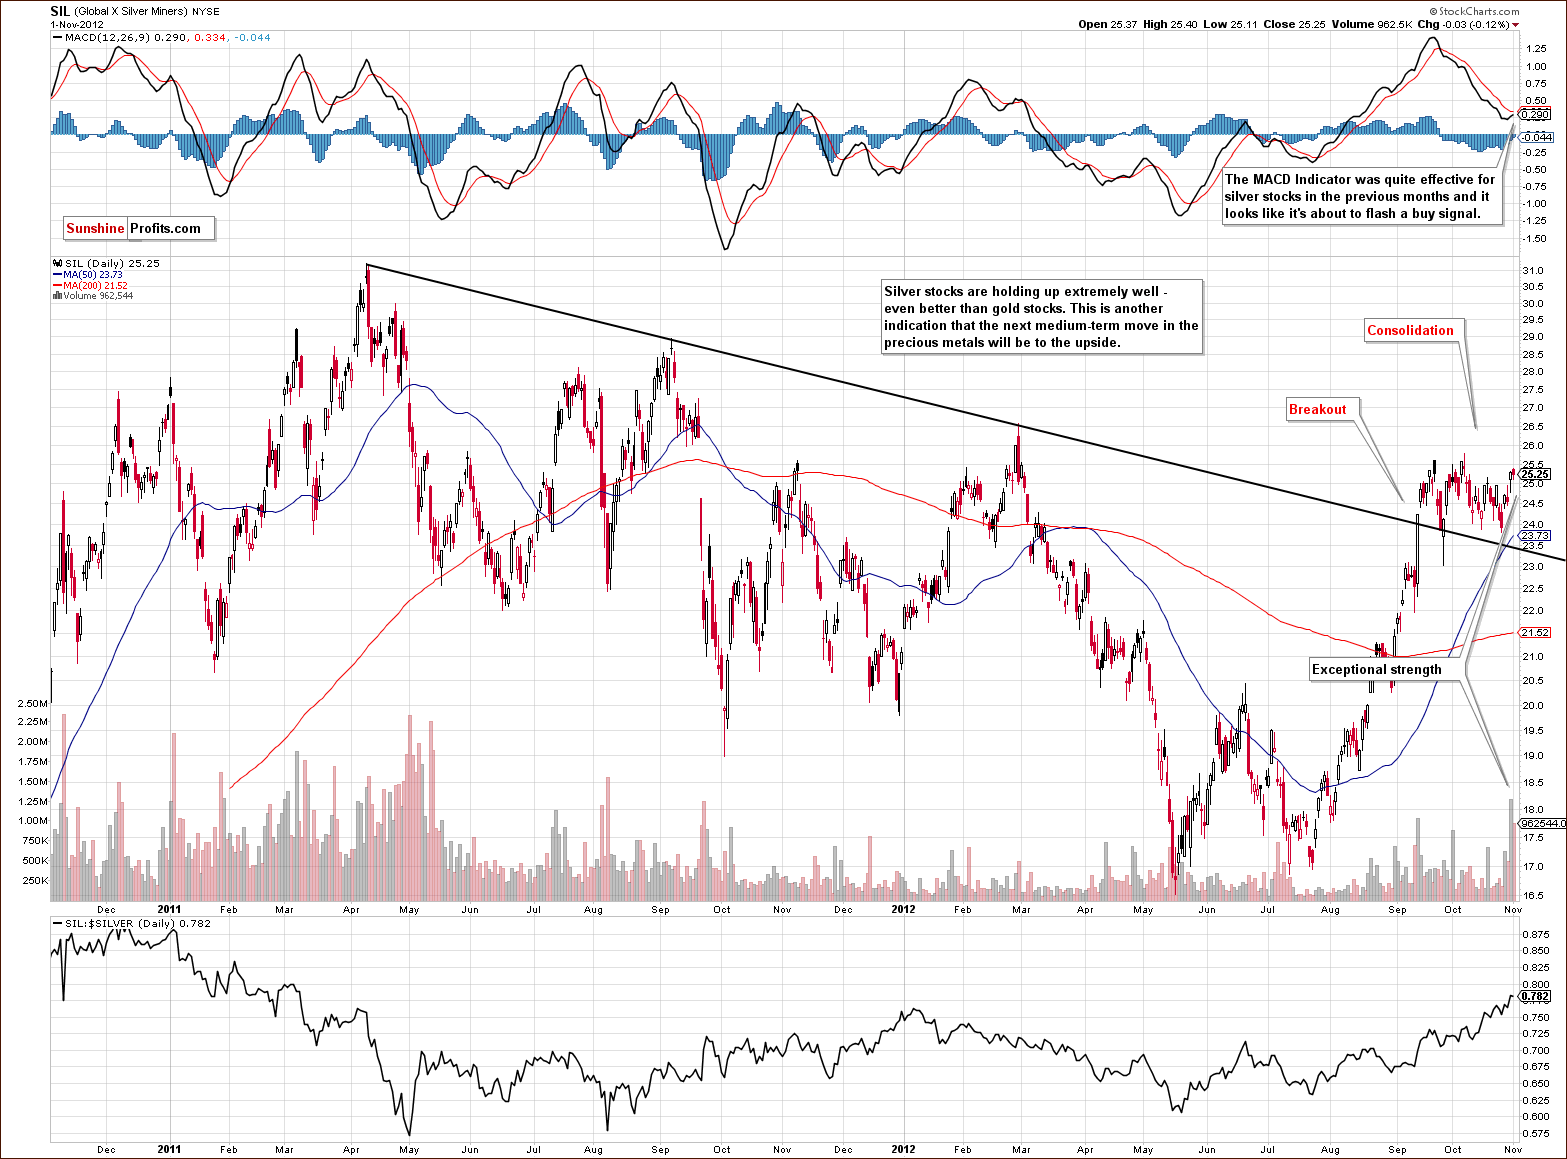 SIL - Global X Silver Miners chart,  large and liquid silver mining companies